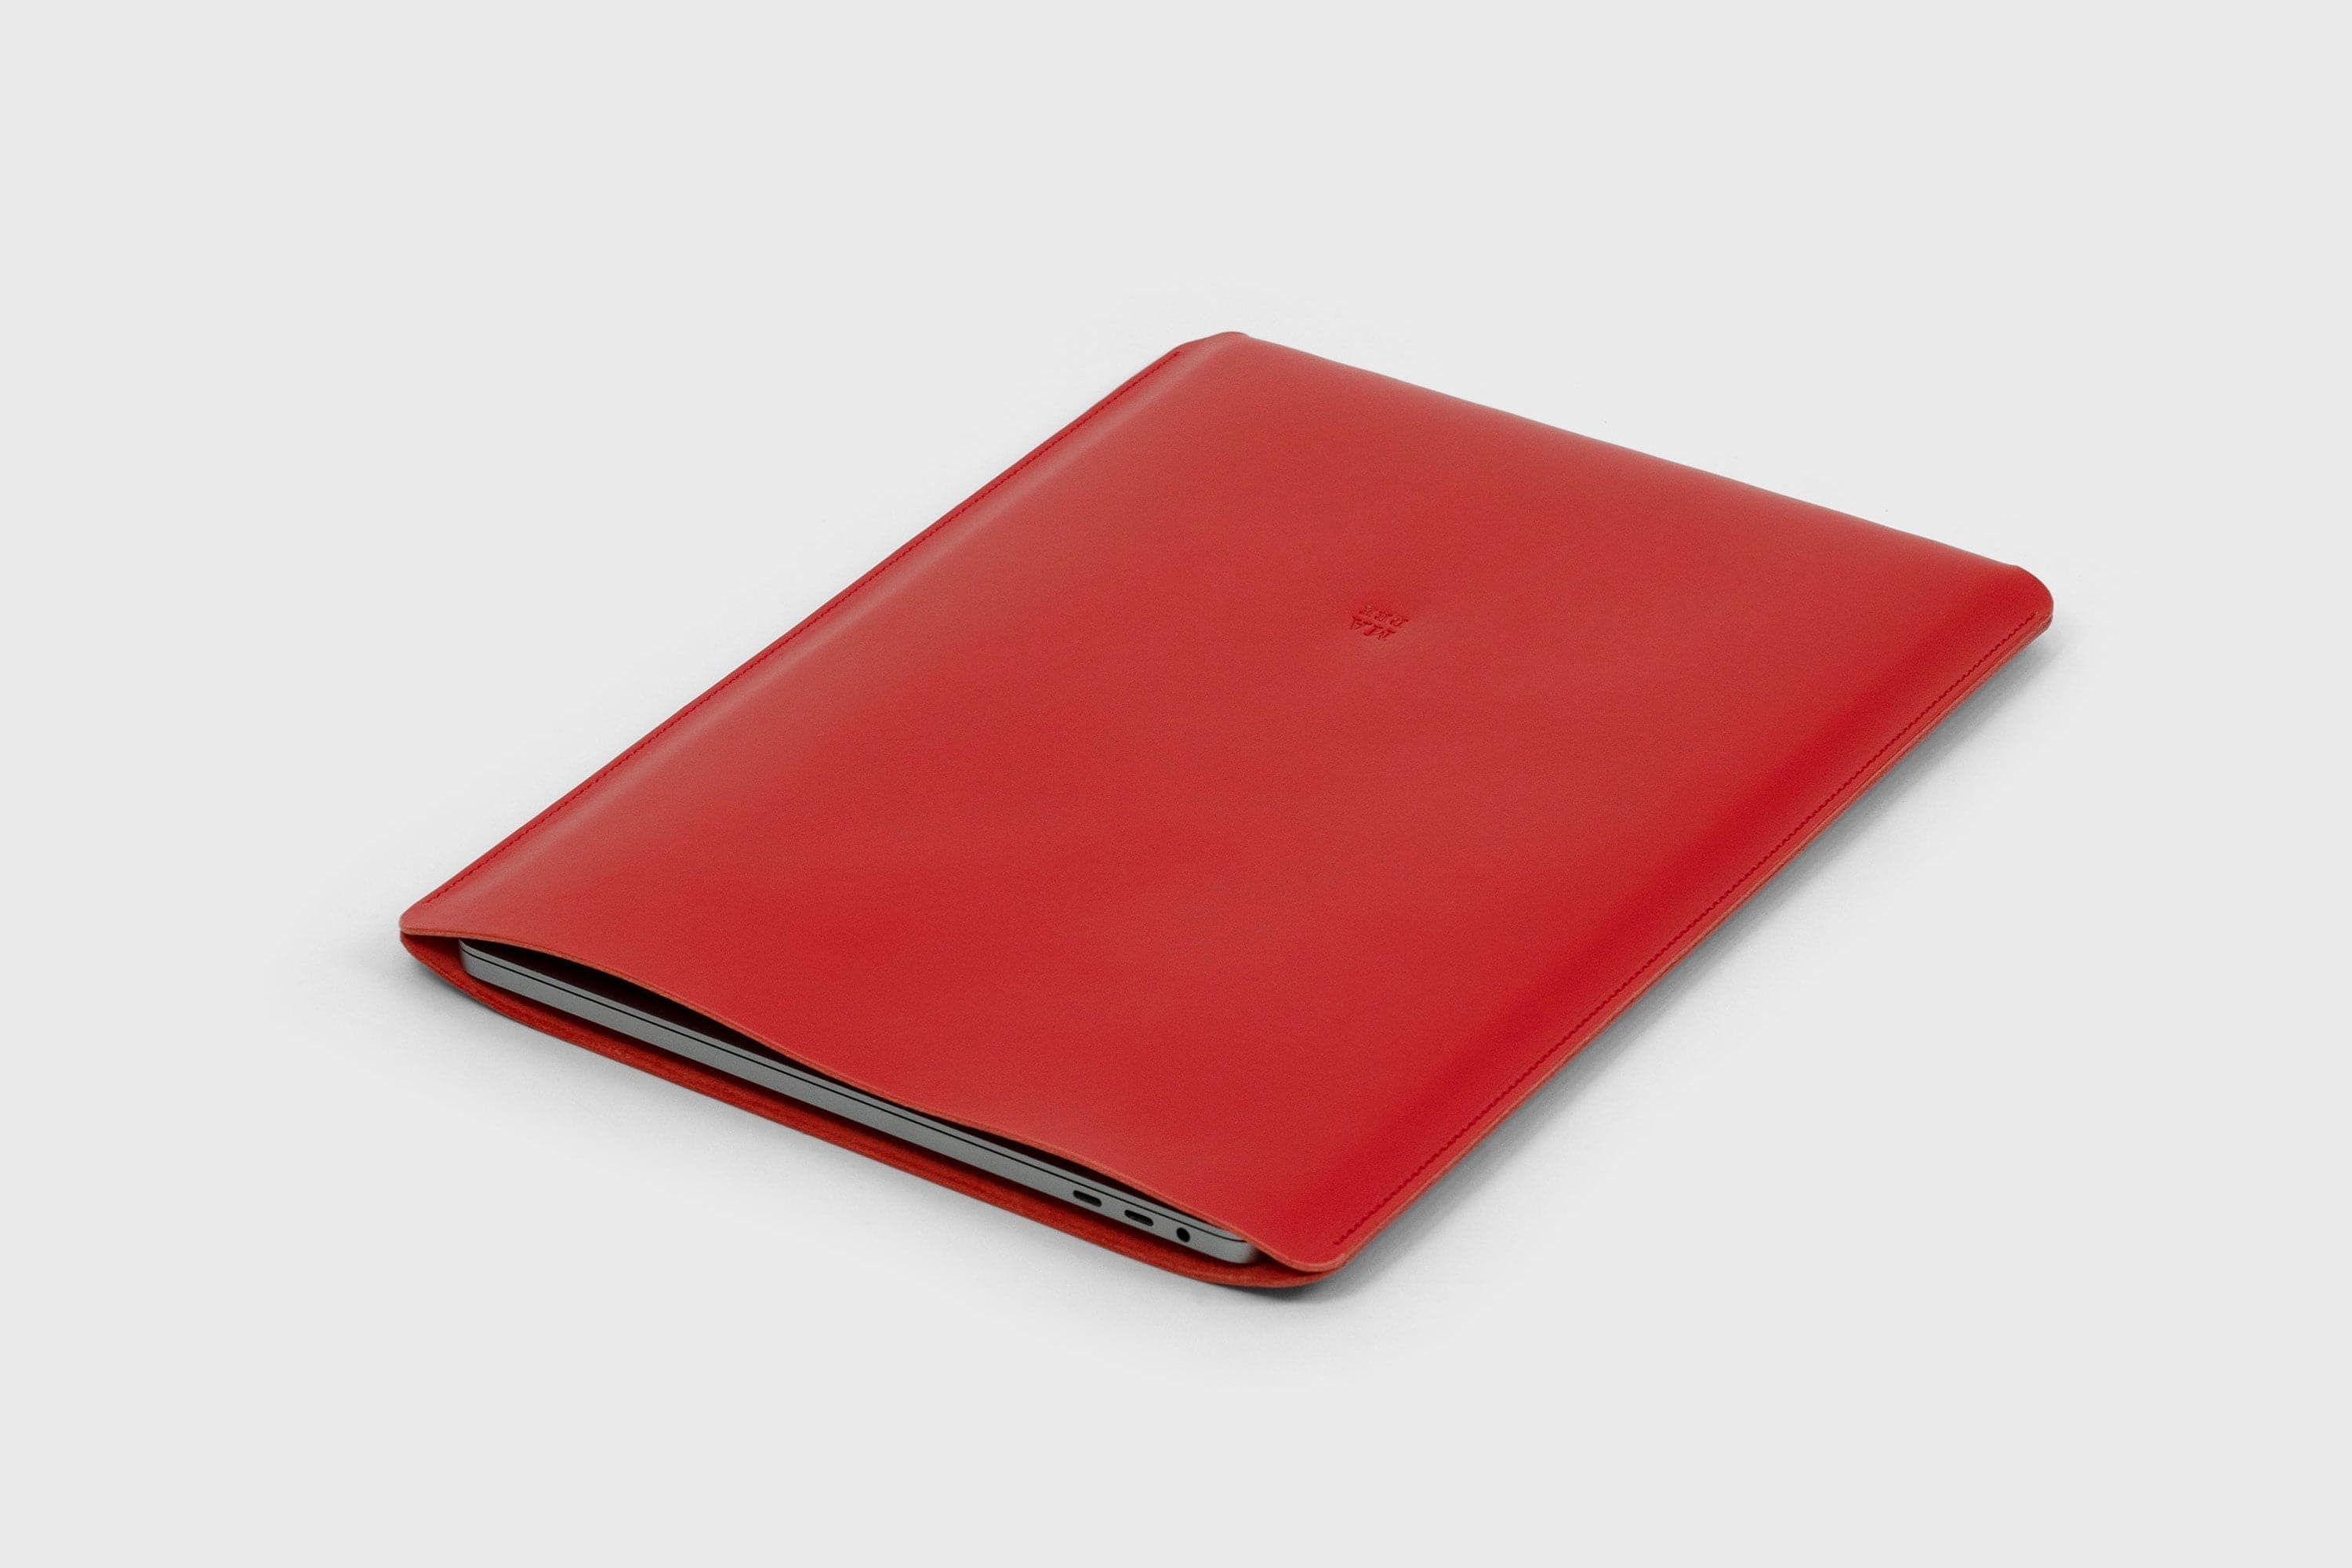 MacBook Pro And Air 13 Inch Leather Sleeve Red Color Minimalistic Vegetable Tanned Leather Qualität Design Manuel Dreesmann Atelier Madre Barcelona Spain